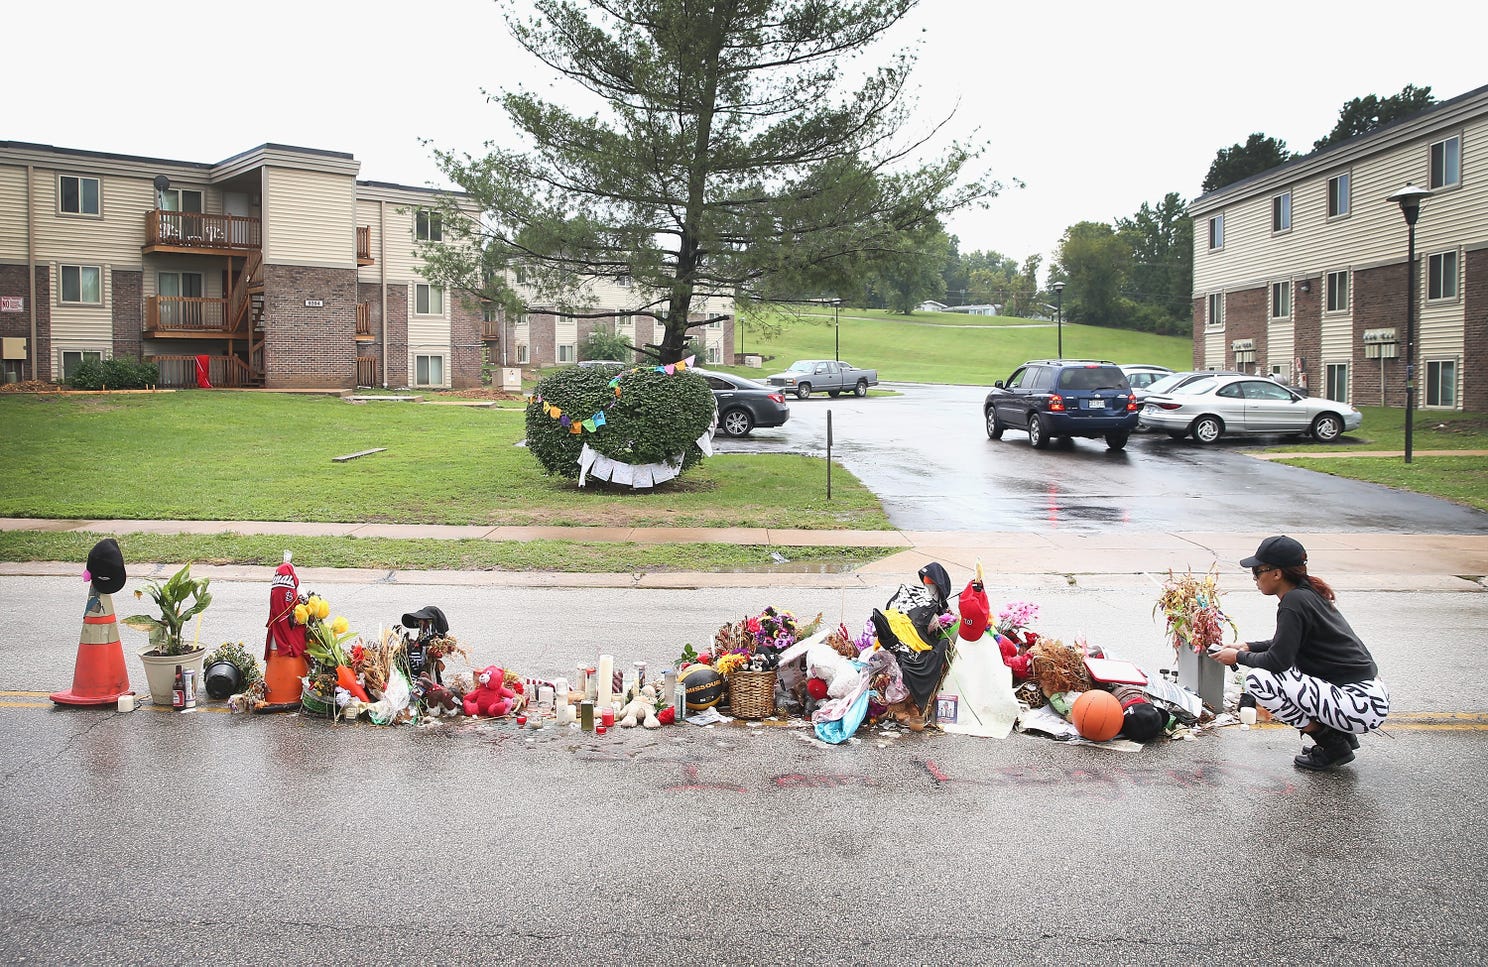 Tamika Staton leaves a message at a memorial in the middle of the road where teenager Michael Brown died after being shot by a police officer in 2014 in Ferguson, Mo., an incident that sparked investigations, protests and a nationwide discussion about policing.